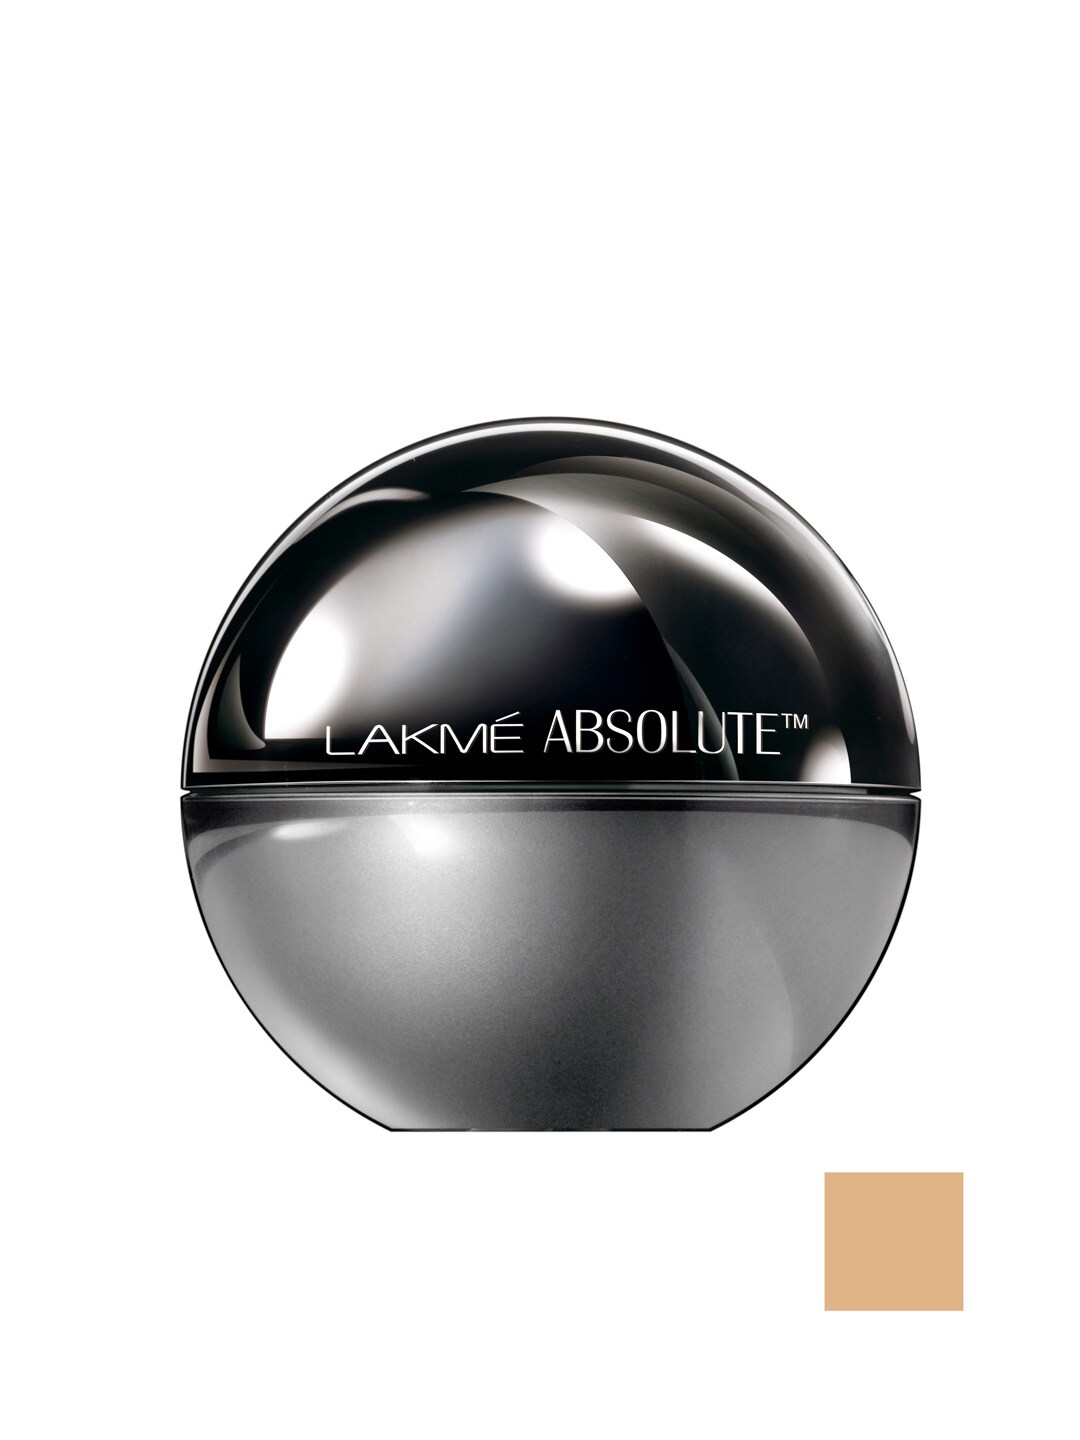 Lakme Absolute Mattreal Ivory Fair Skin Natural Mousse 01